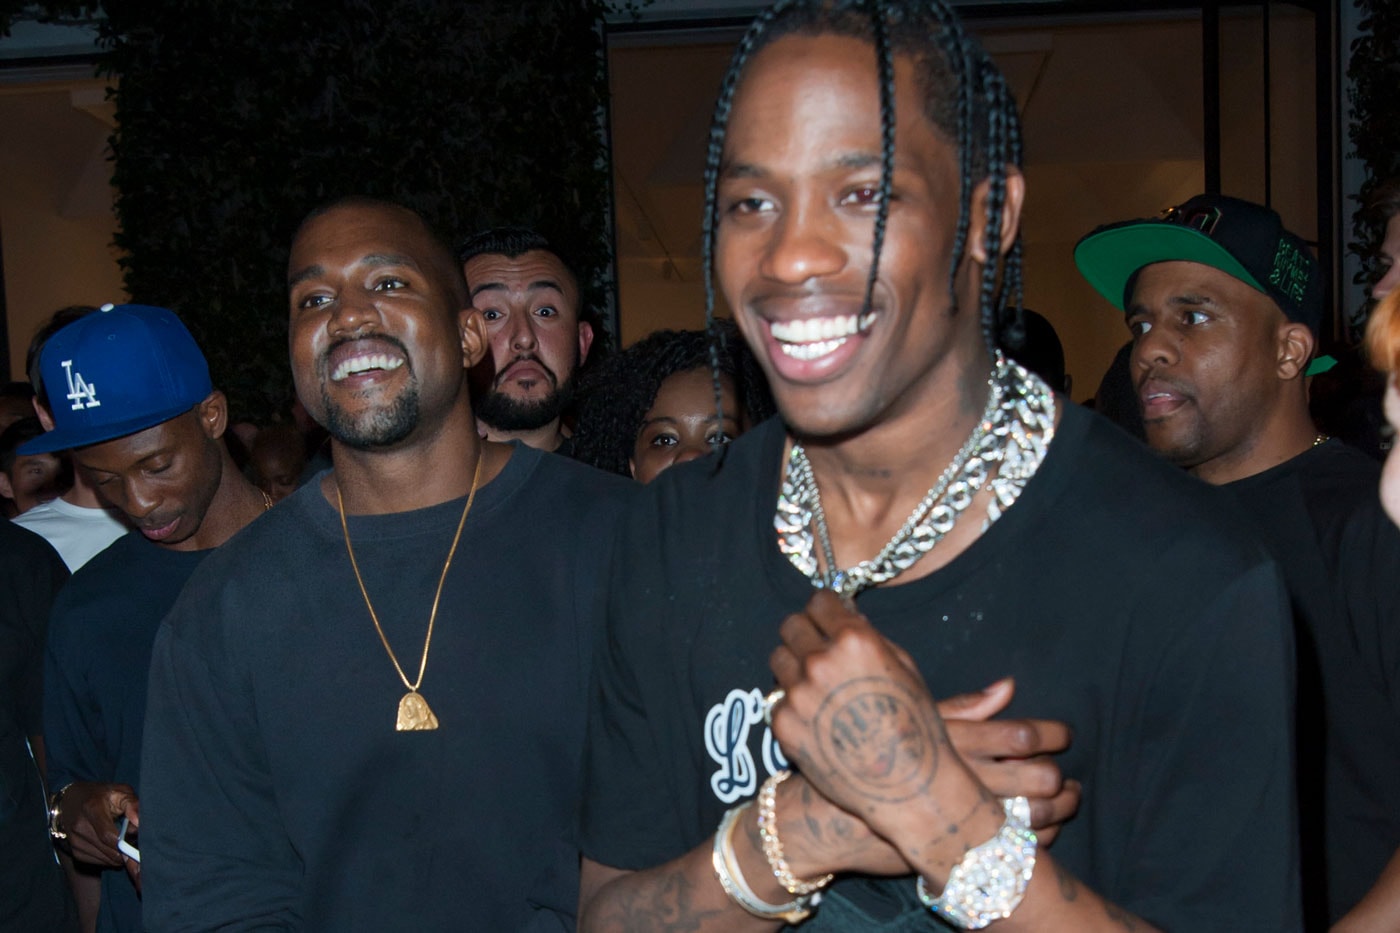 Watch Kanye West Perform with Travi$ Scott and Vic Mensa at Summer Ends